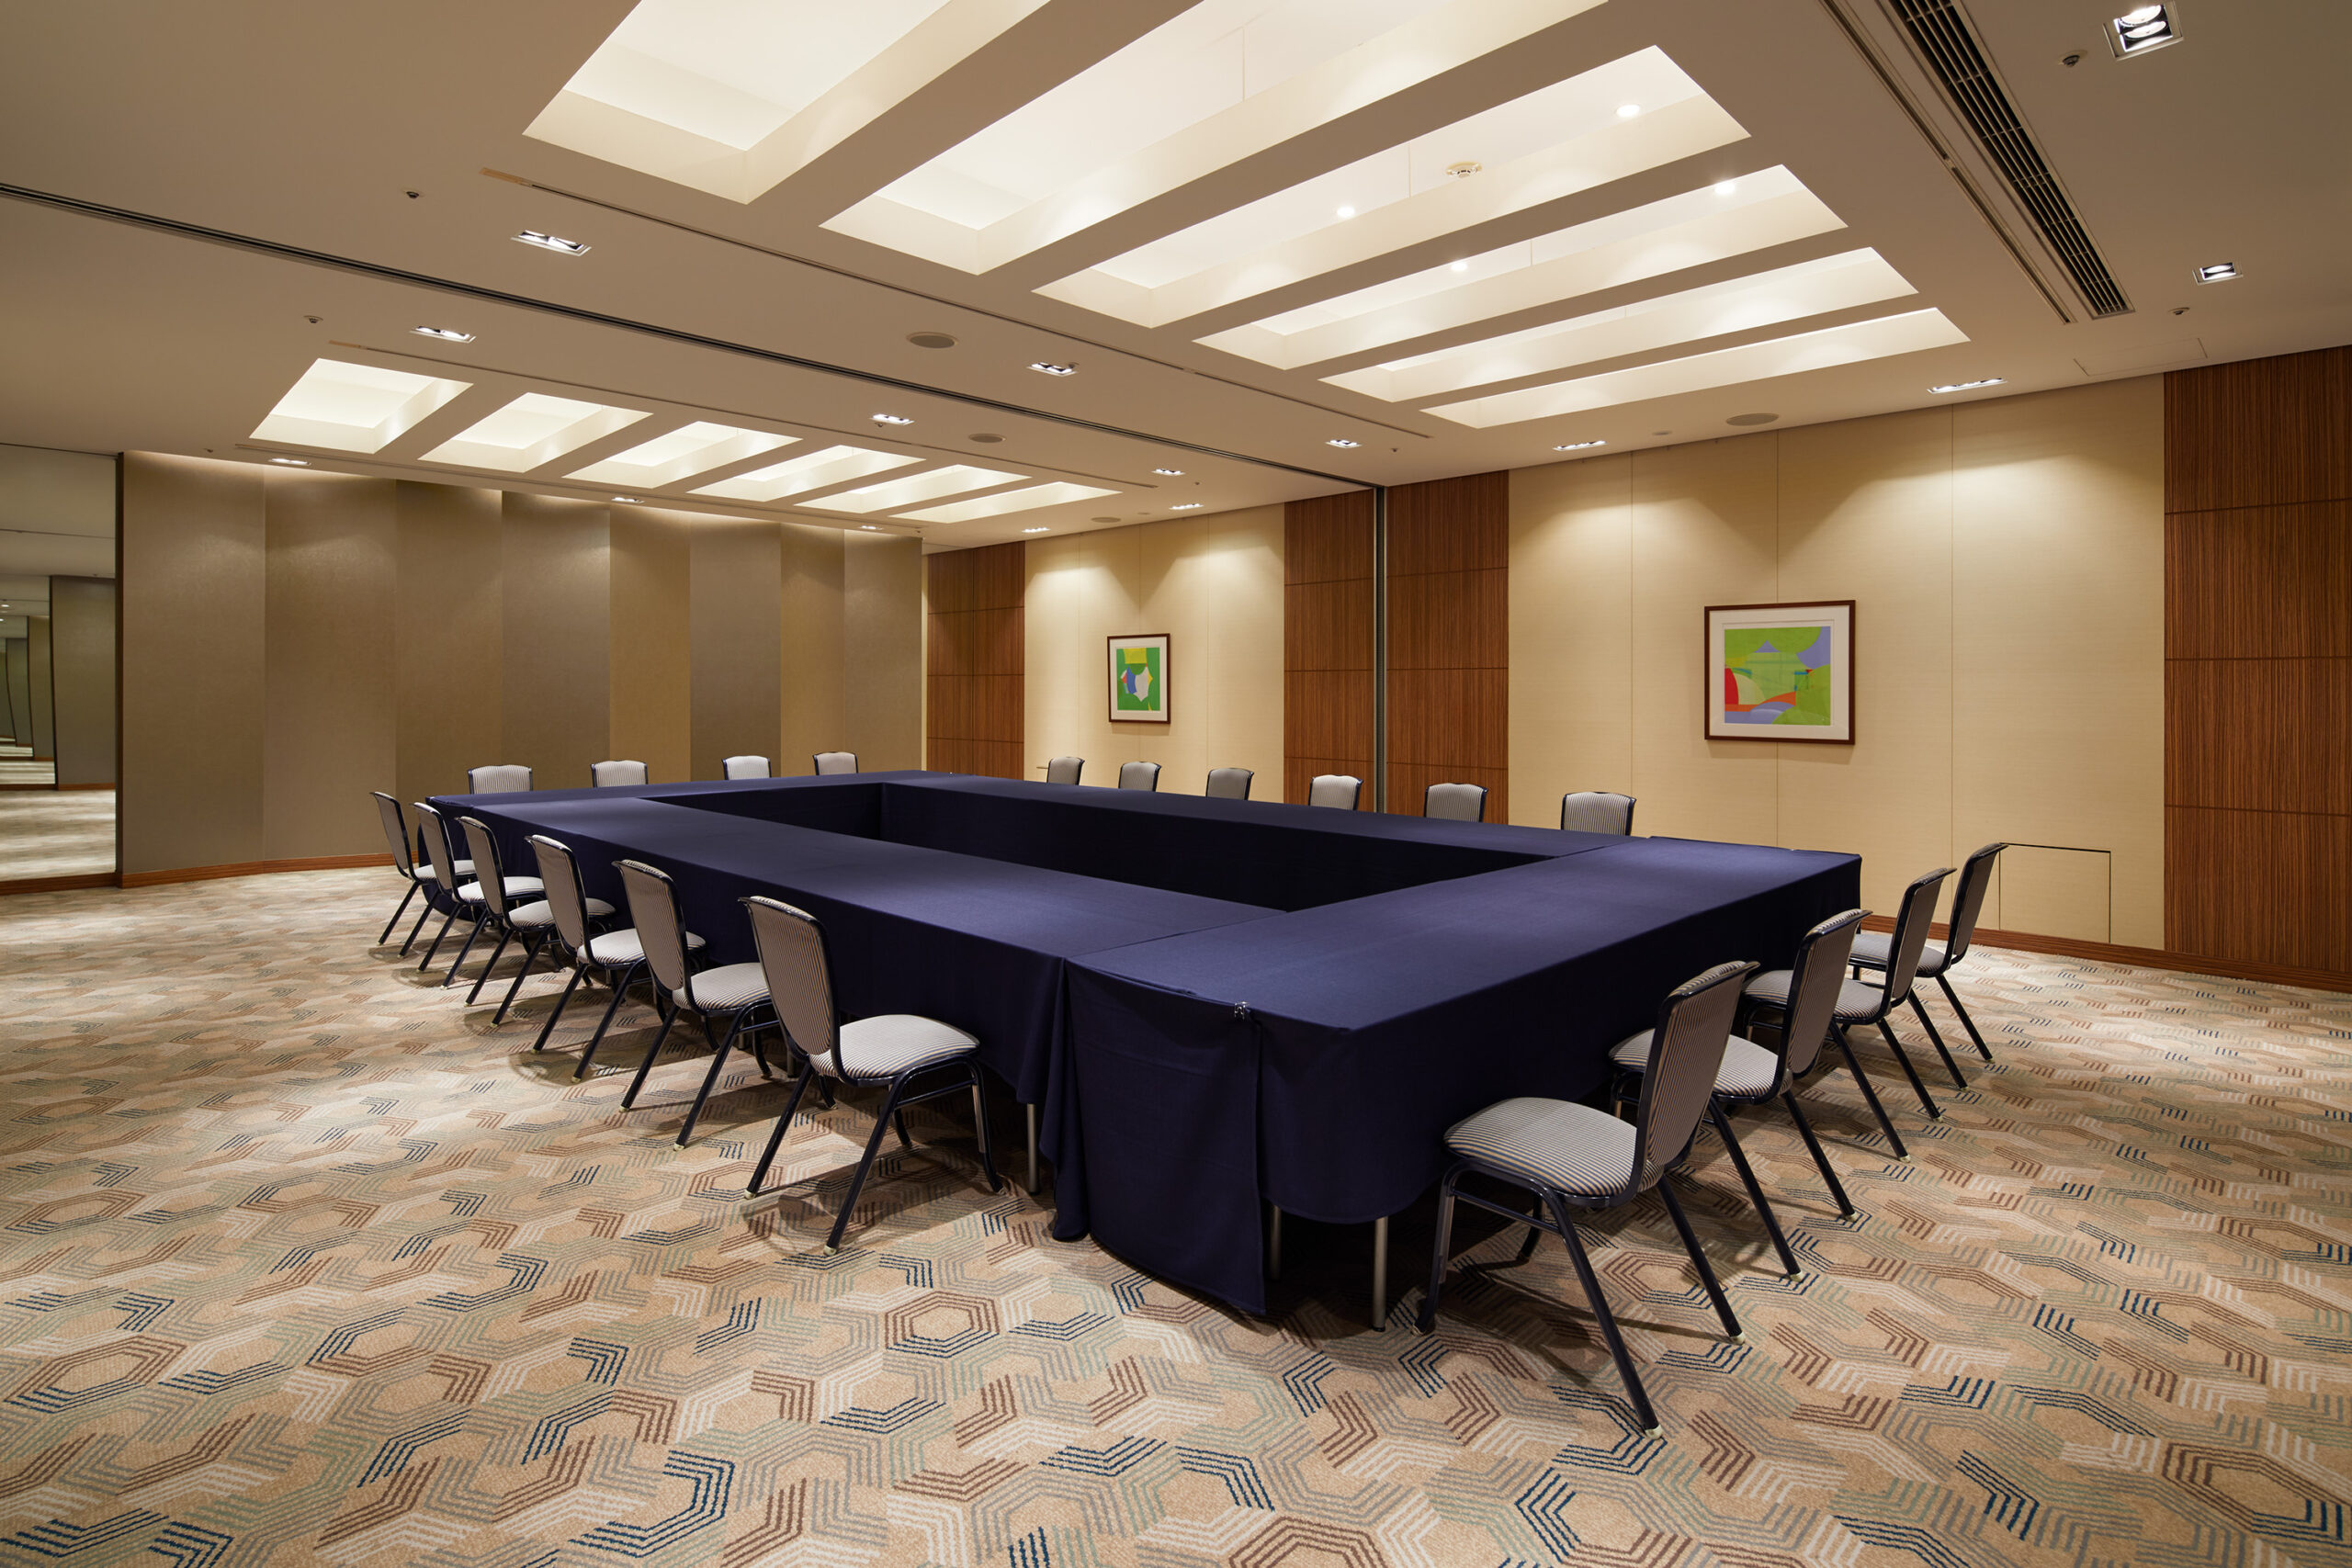 Small ＆Medium-sized Banquet Rooms